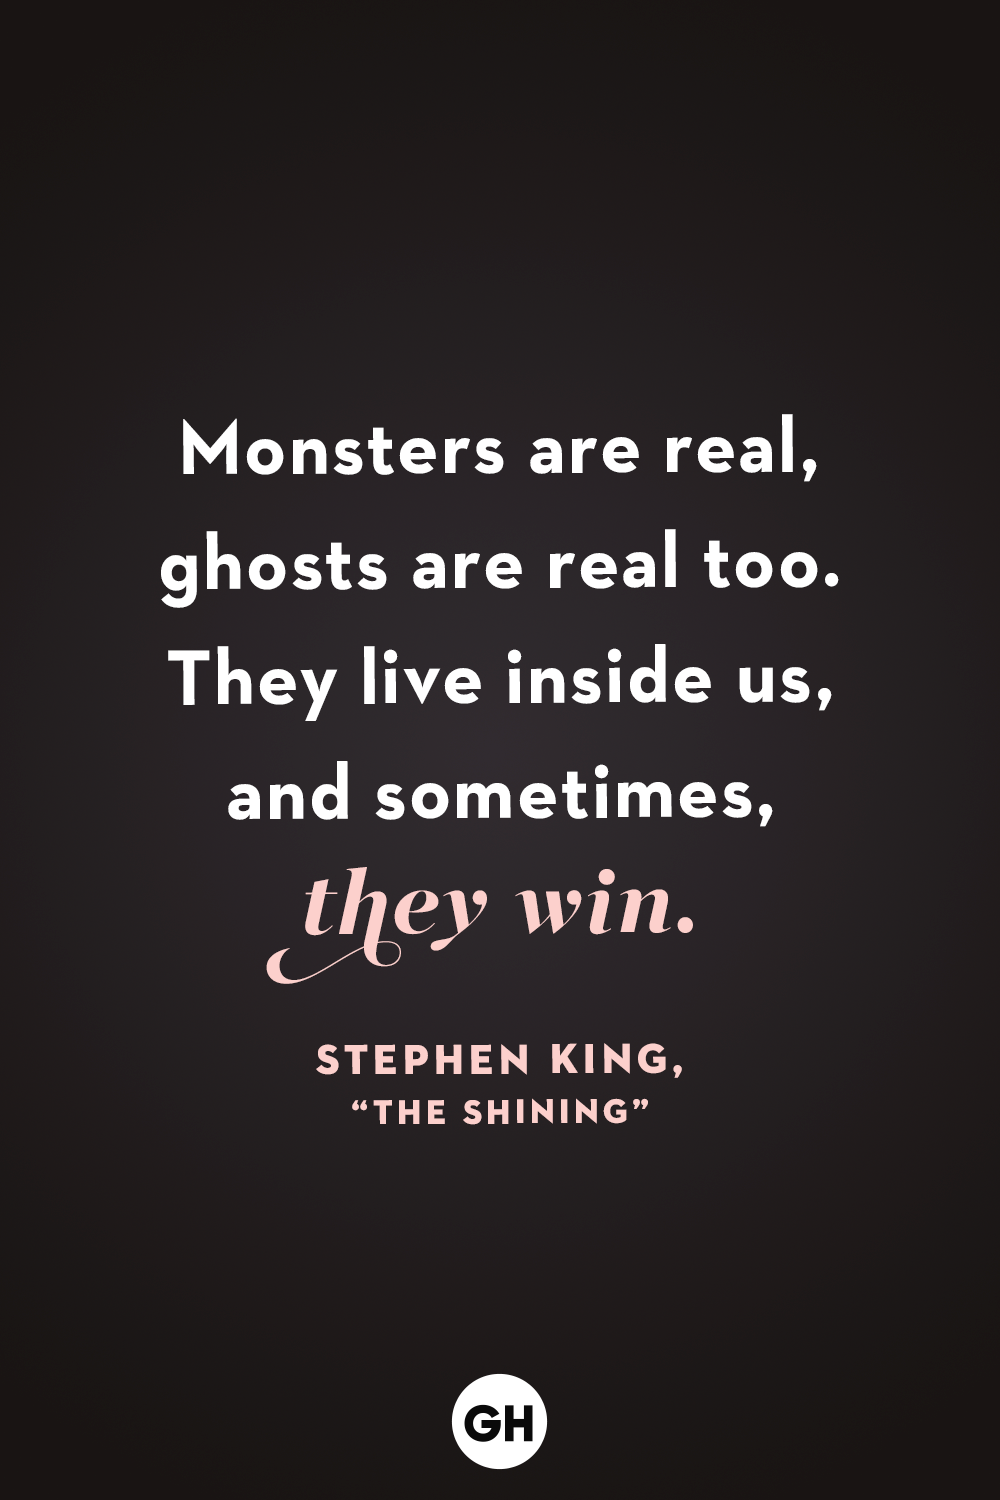 Best Scary Quotes Sayings from Movies & Books